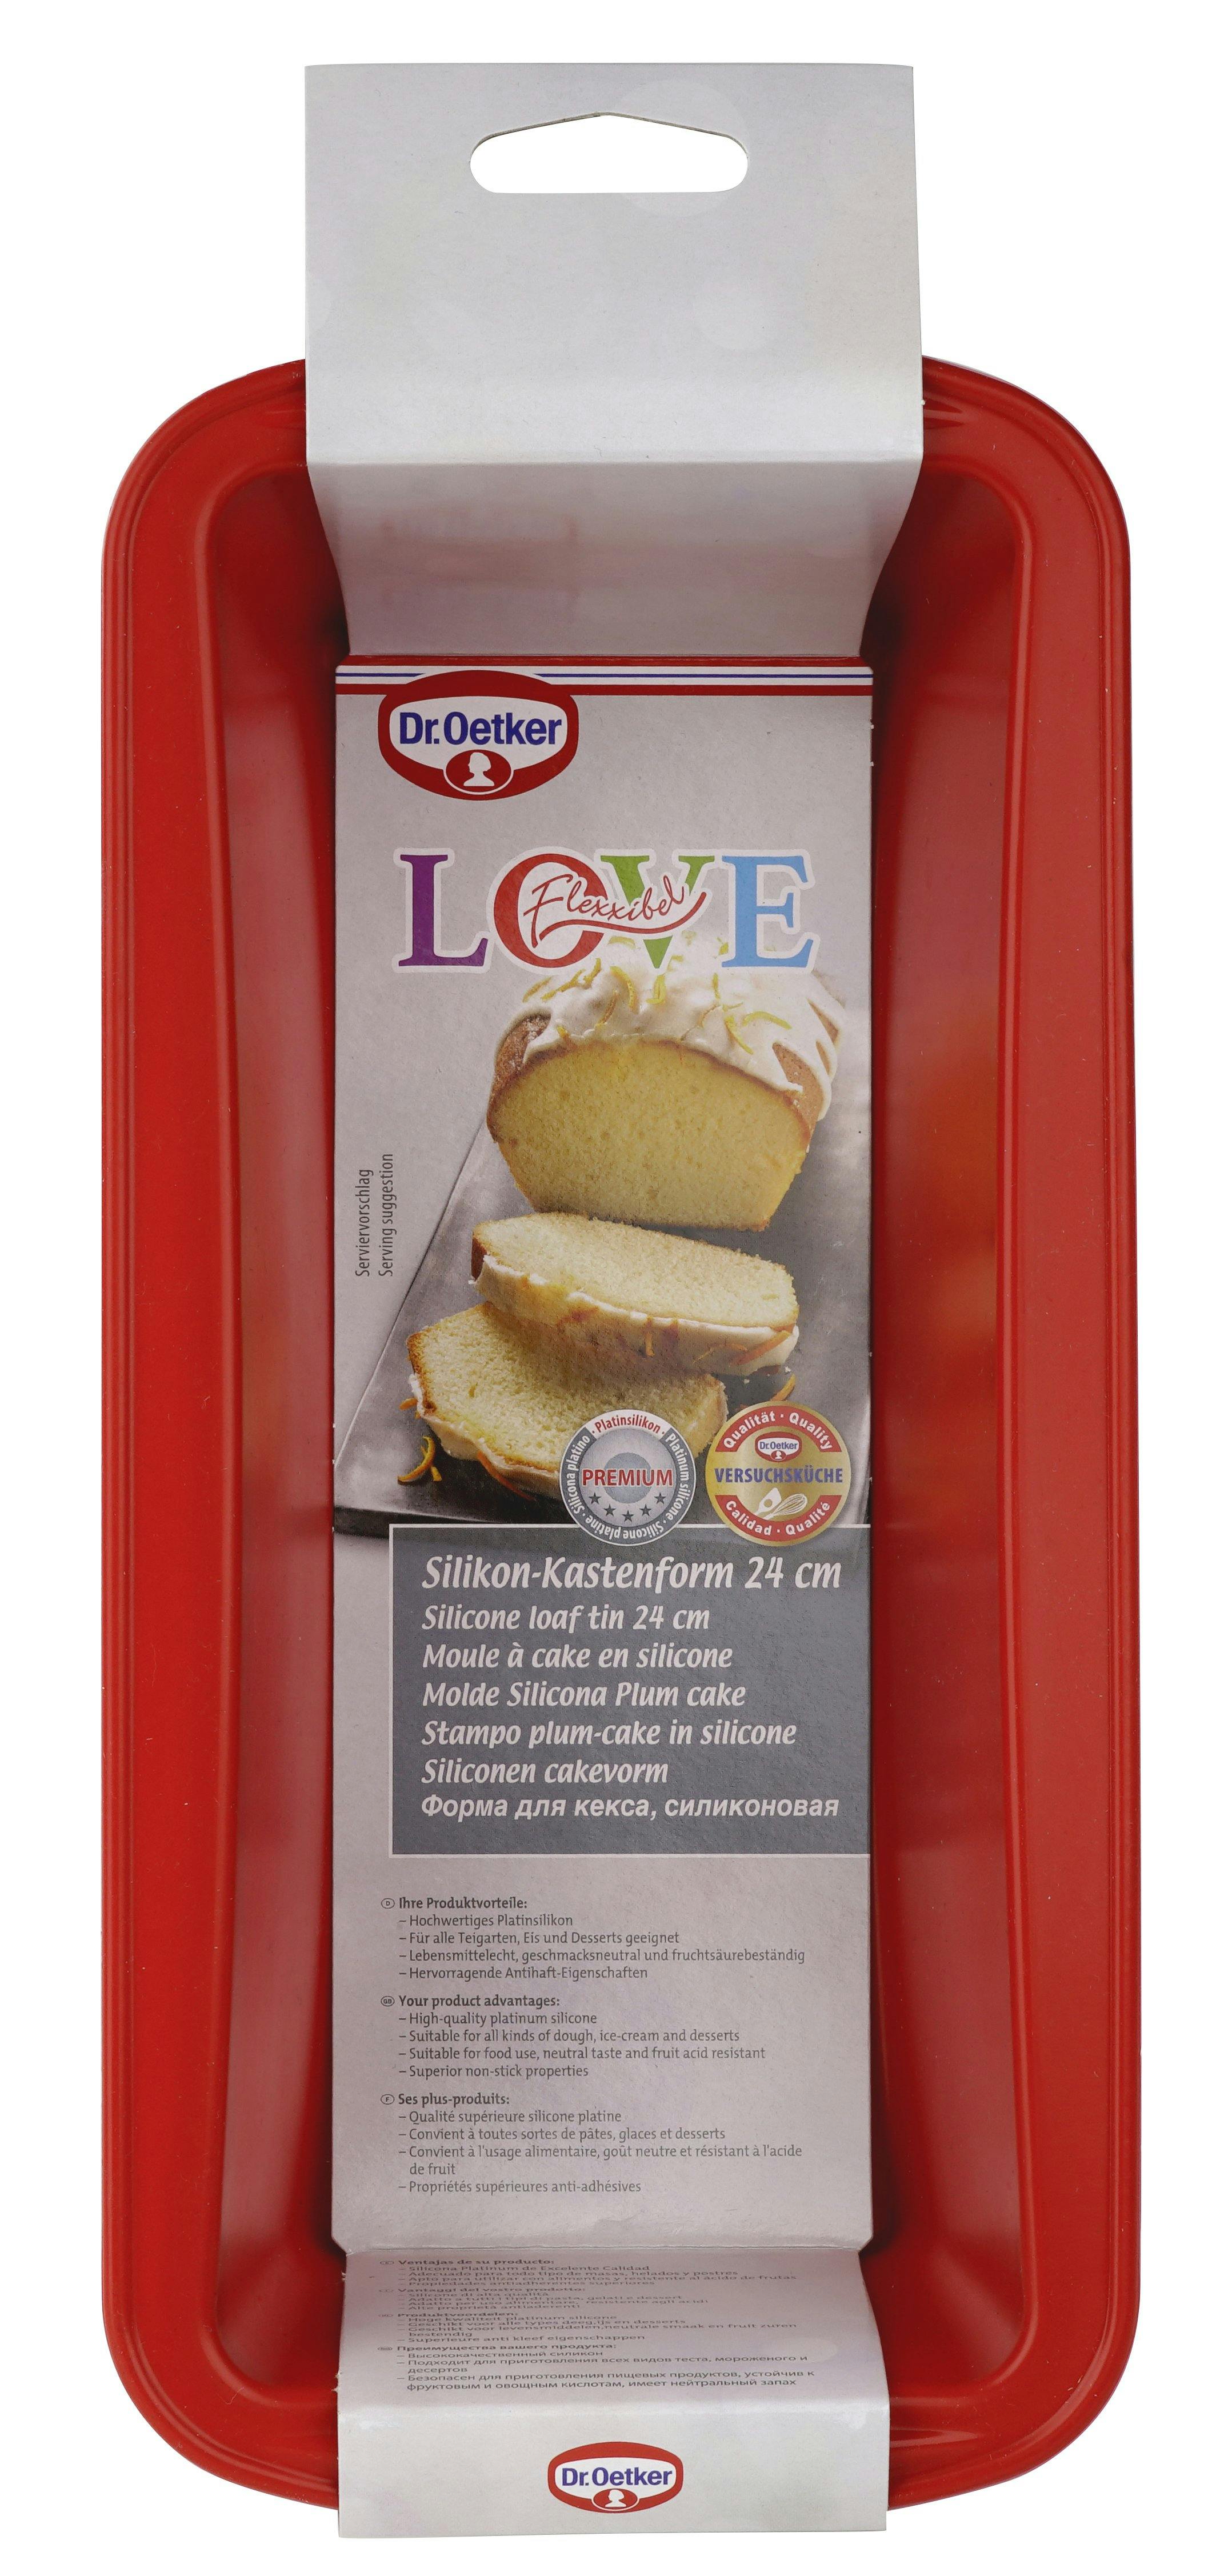 Dr.oetker tradition, tortiera cuore 25 cm